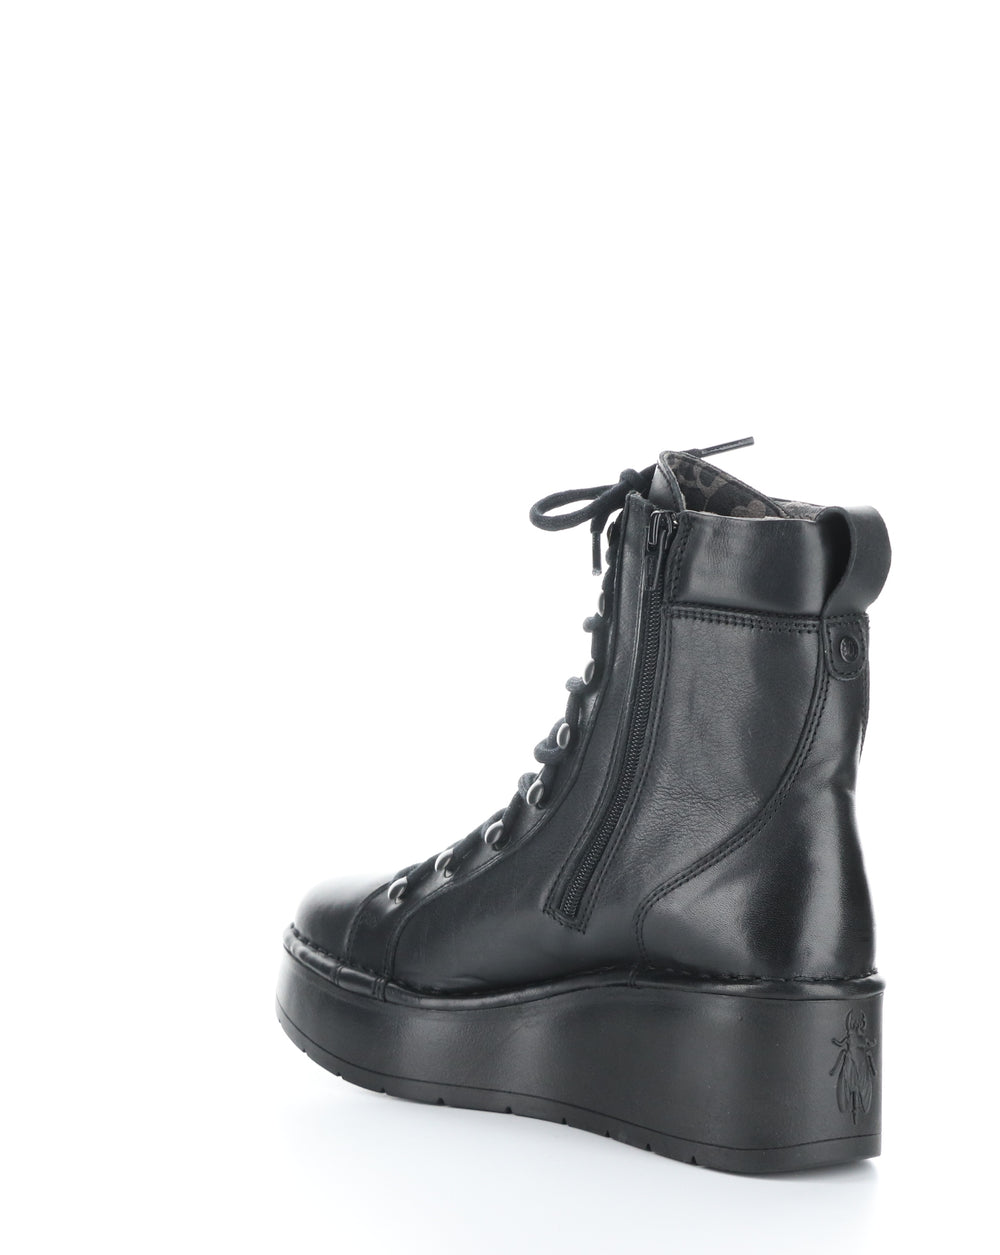 HAND247FLY 000 BLACK Lace-up Boots